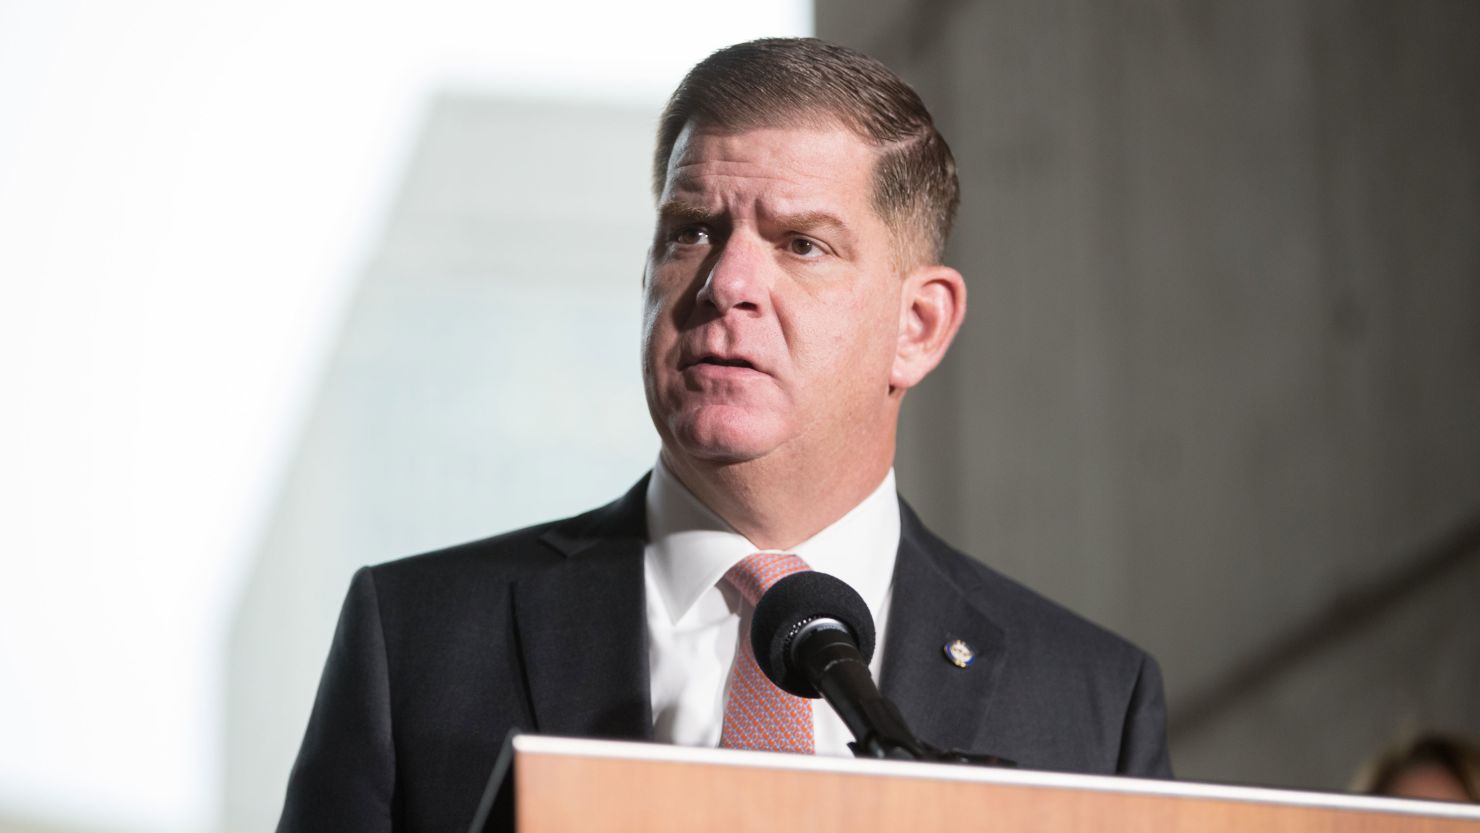  Boston Mayor Marty Walsh speaks at a press conference announcing the postponement of the Boston Marathon to September 15th on March 13, 2020 in Boston, Massachusetts. (Photo by Scott Eisen/Getty Images)